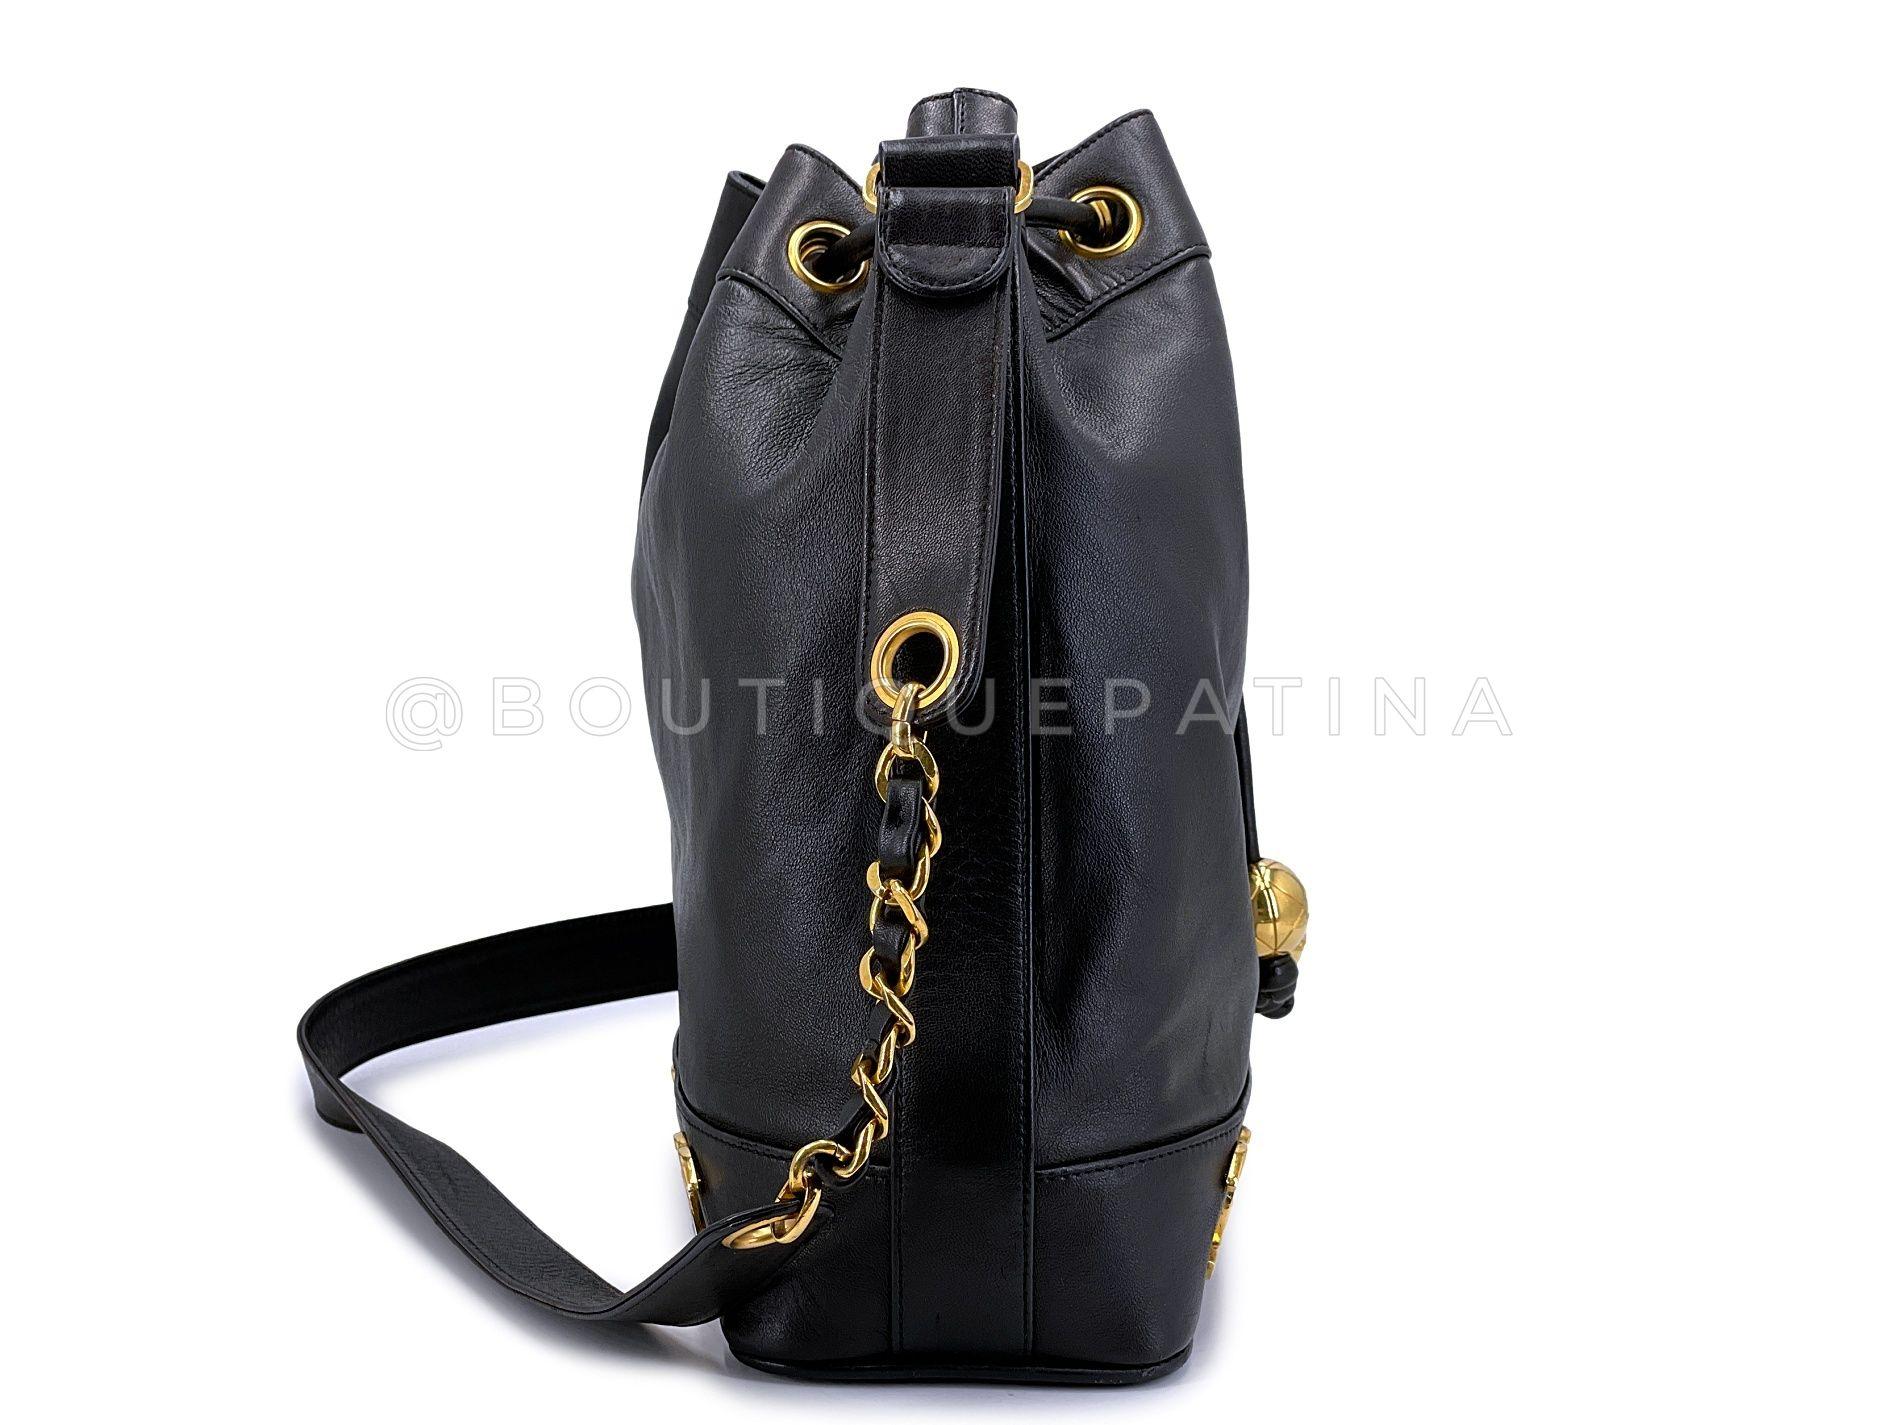 Chanel Vintage Black Lambskin 6-CC Rectangular Bucket Drawstring Bag GHW 68069 In Excellent Condition For Sale In Costa Mesa, CA